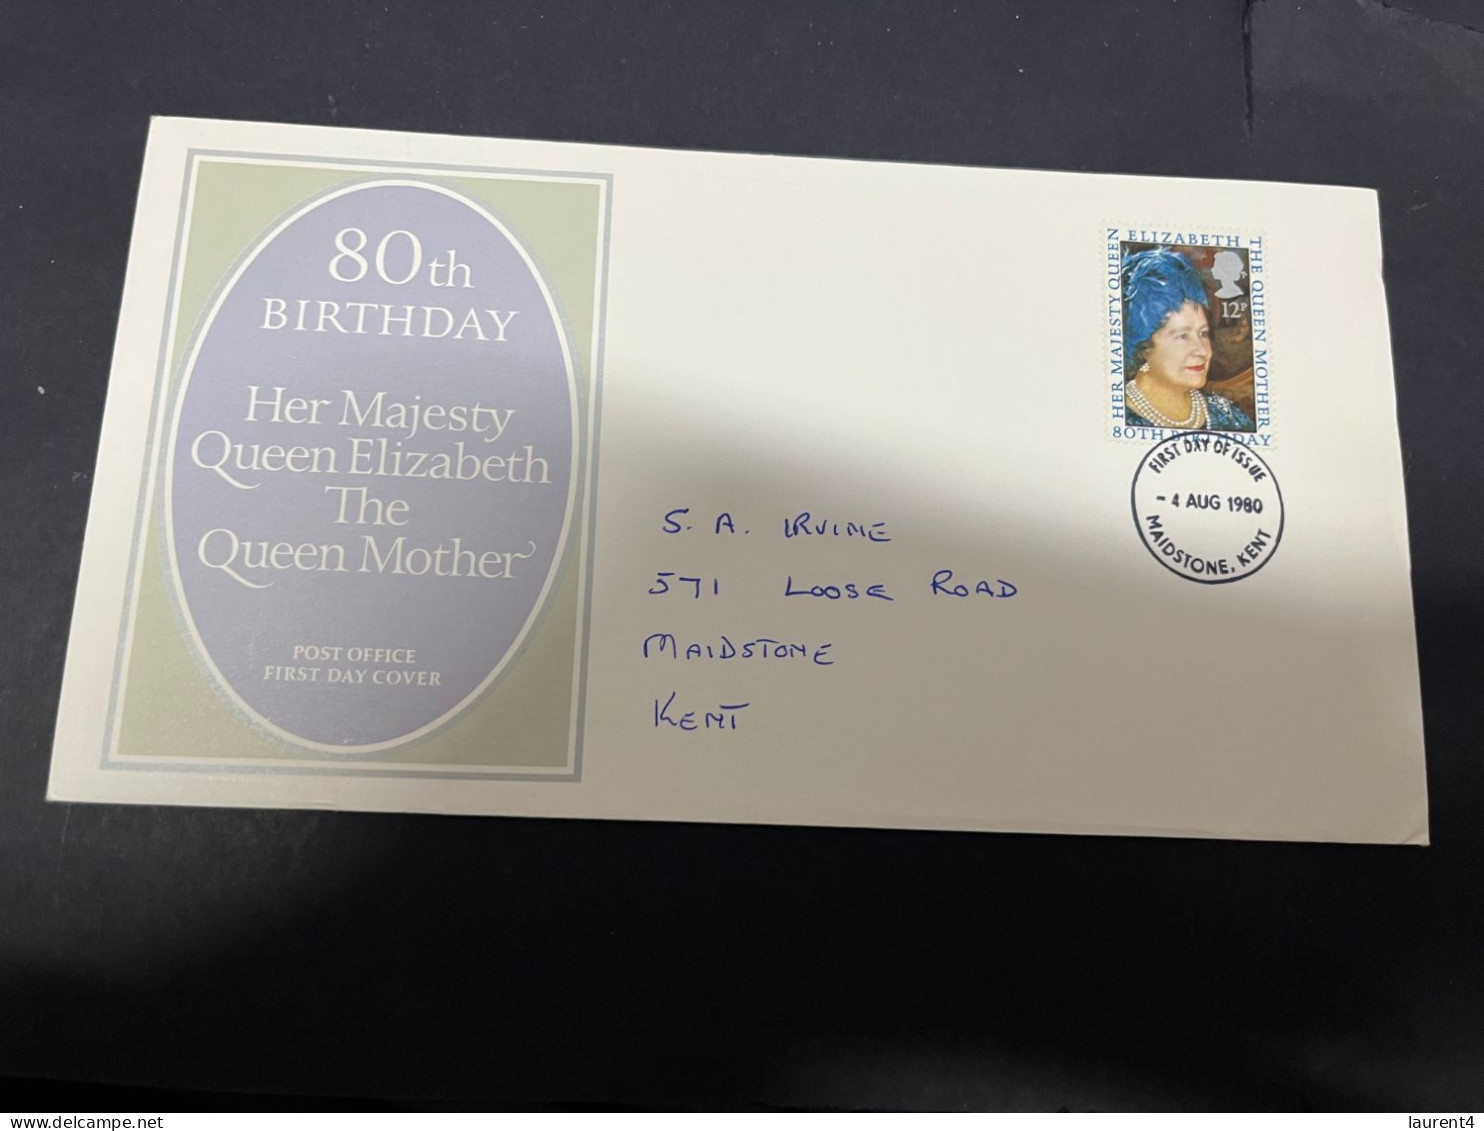 9-2-2024 (3 X 44) UK (Great Britain) FDC - 1980 -The Queen Mother's 80th Birthday - 1971-1980 Decimal Issues